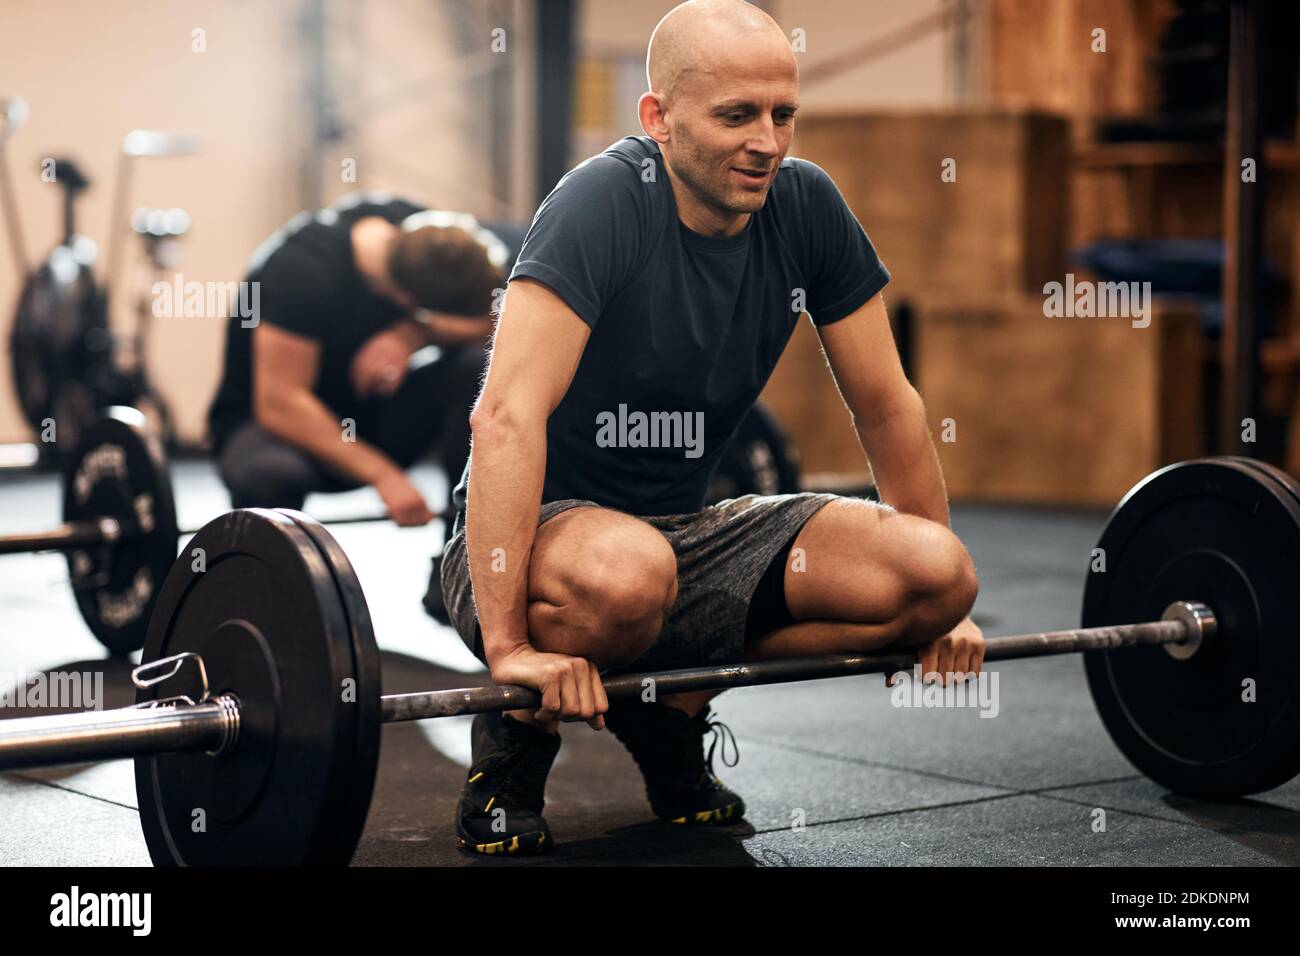 Fit man in sportswear getting ready to lift heavy weights during a strength training class a the gym Stock Photo